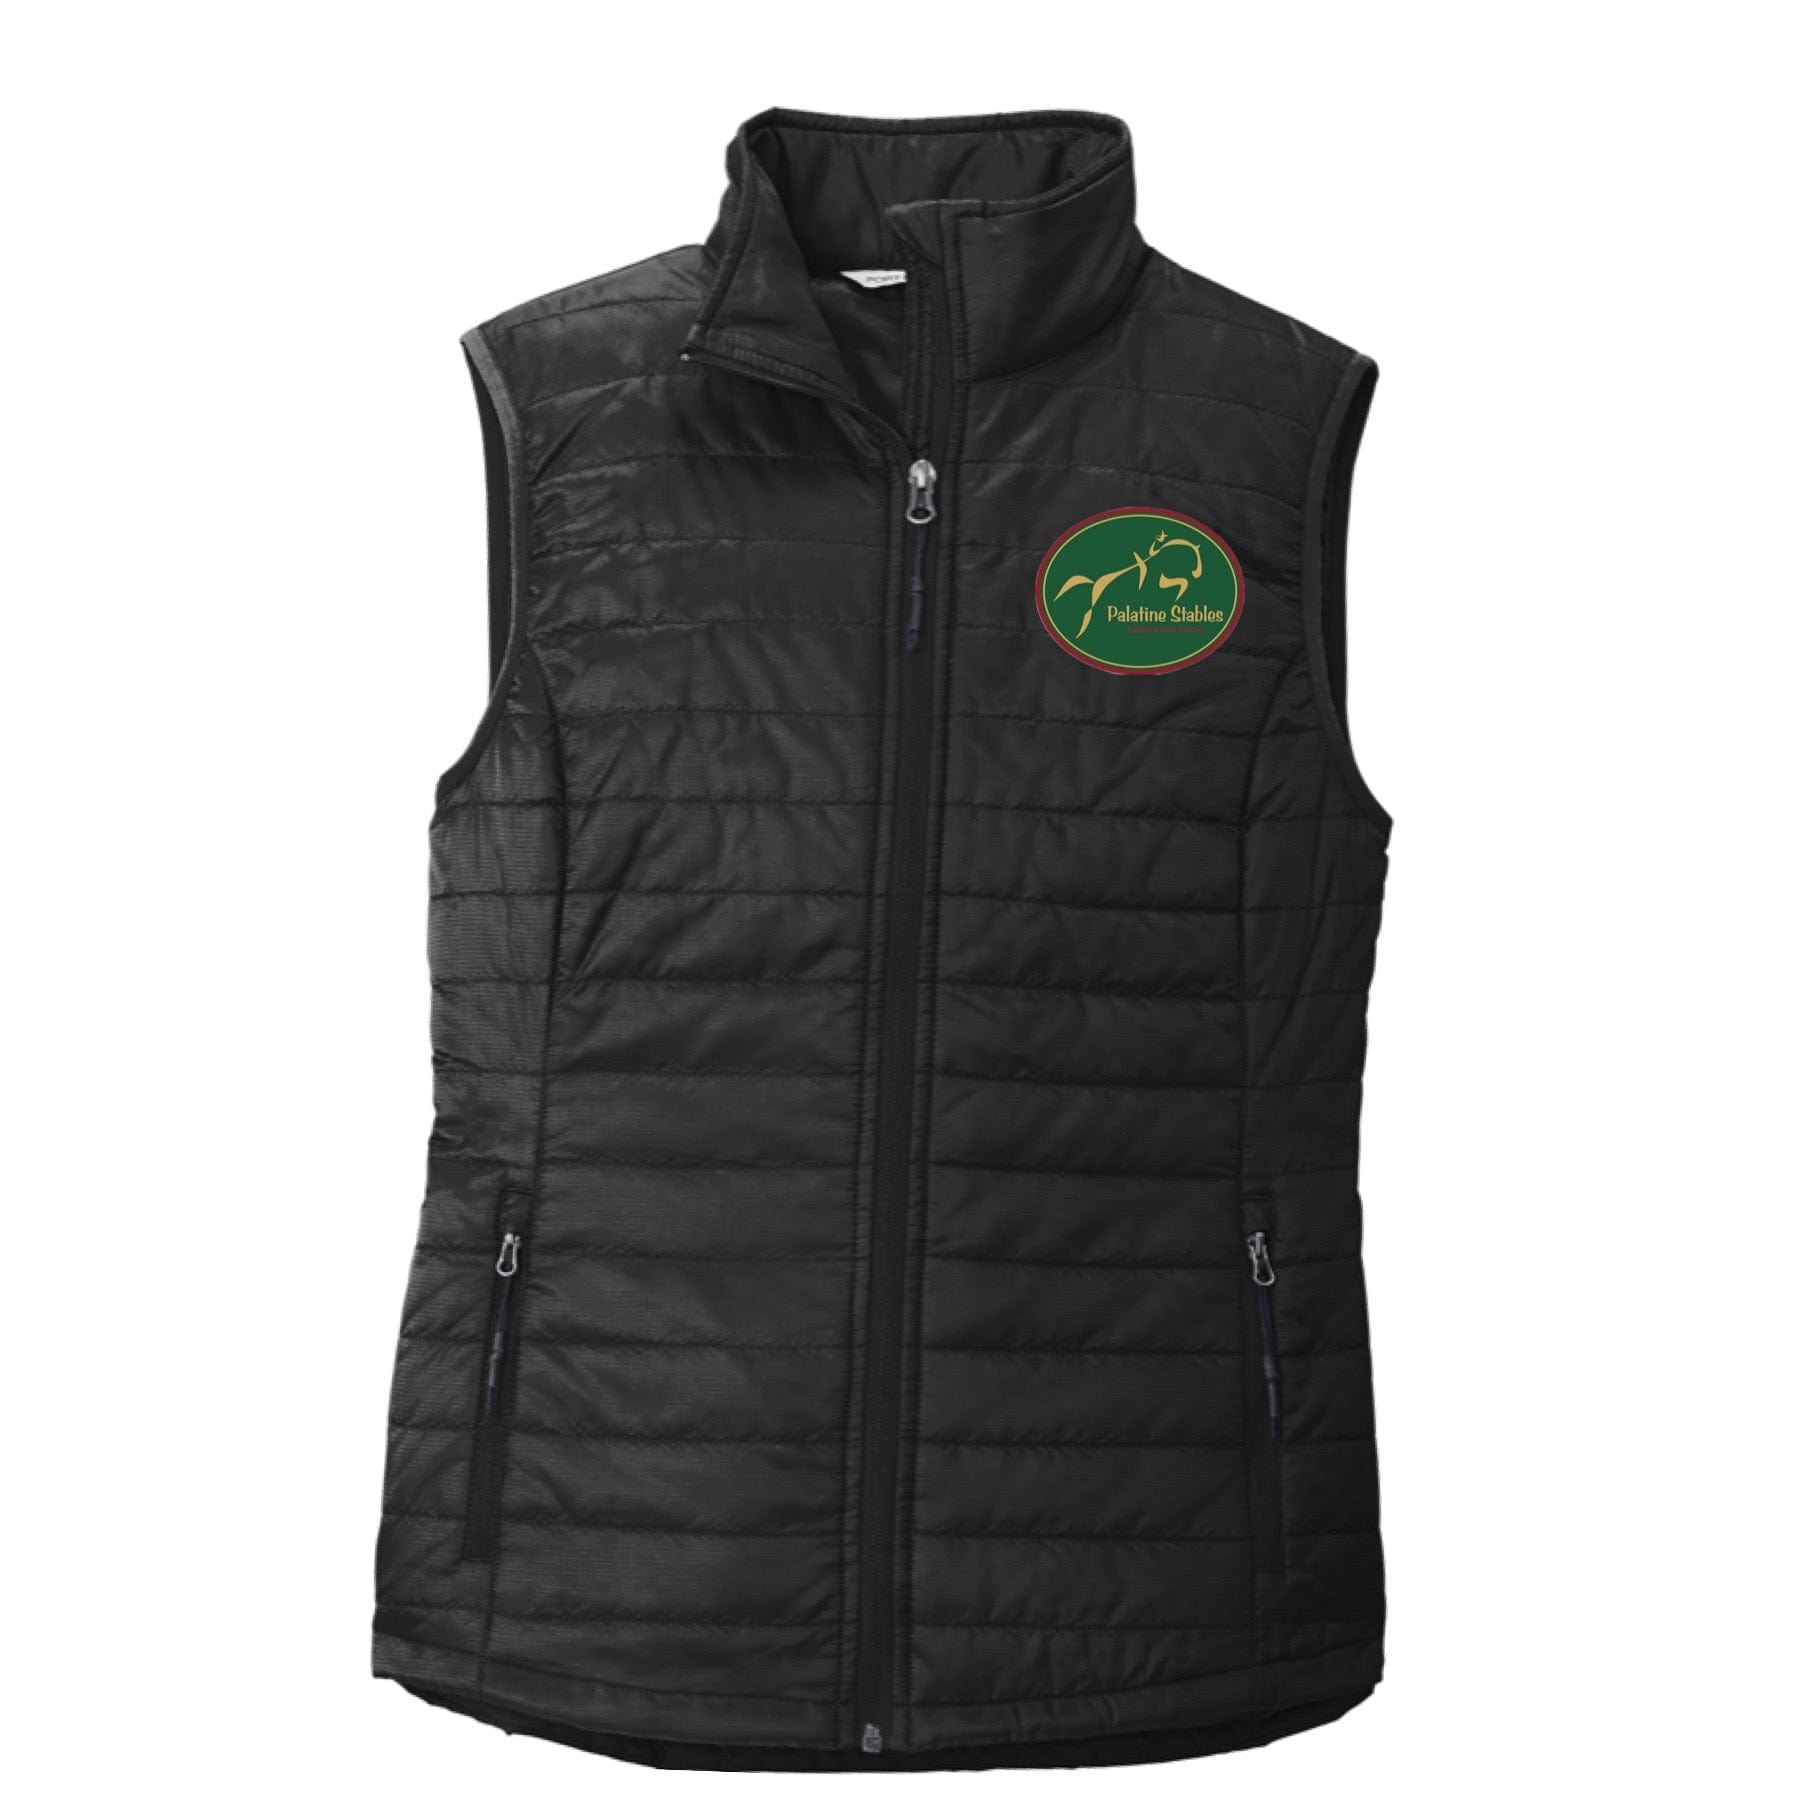 Equestrian Team Apparel Palatine Stables Puffy Vest equestrian team apparel online tack store mobile tack store custom farm apparel custom show stable clothing equestrian lifestyle horse show clothing riding clothes horses equestrian tack store